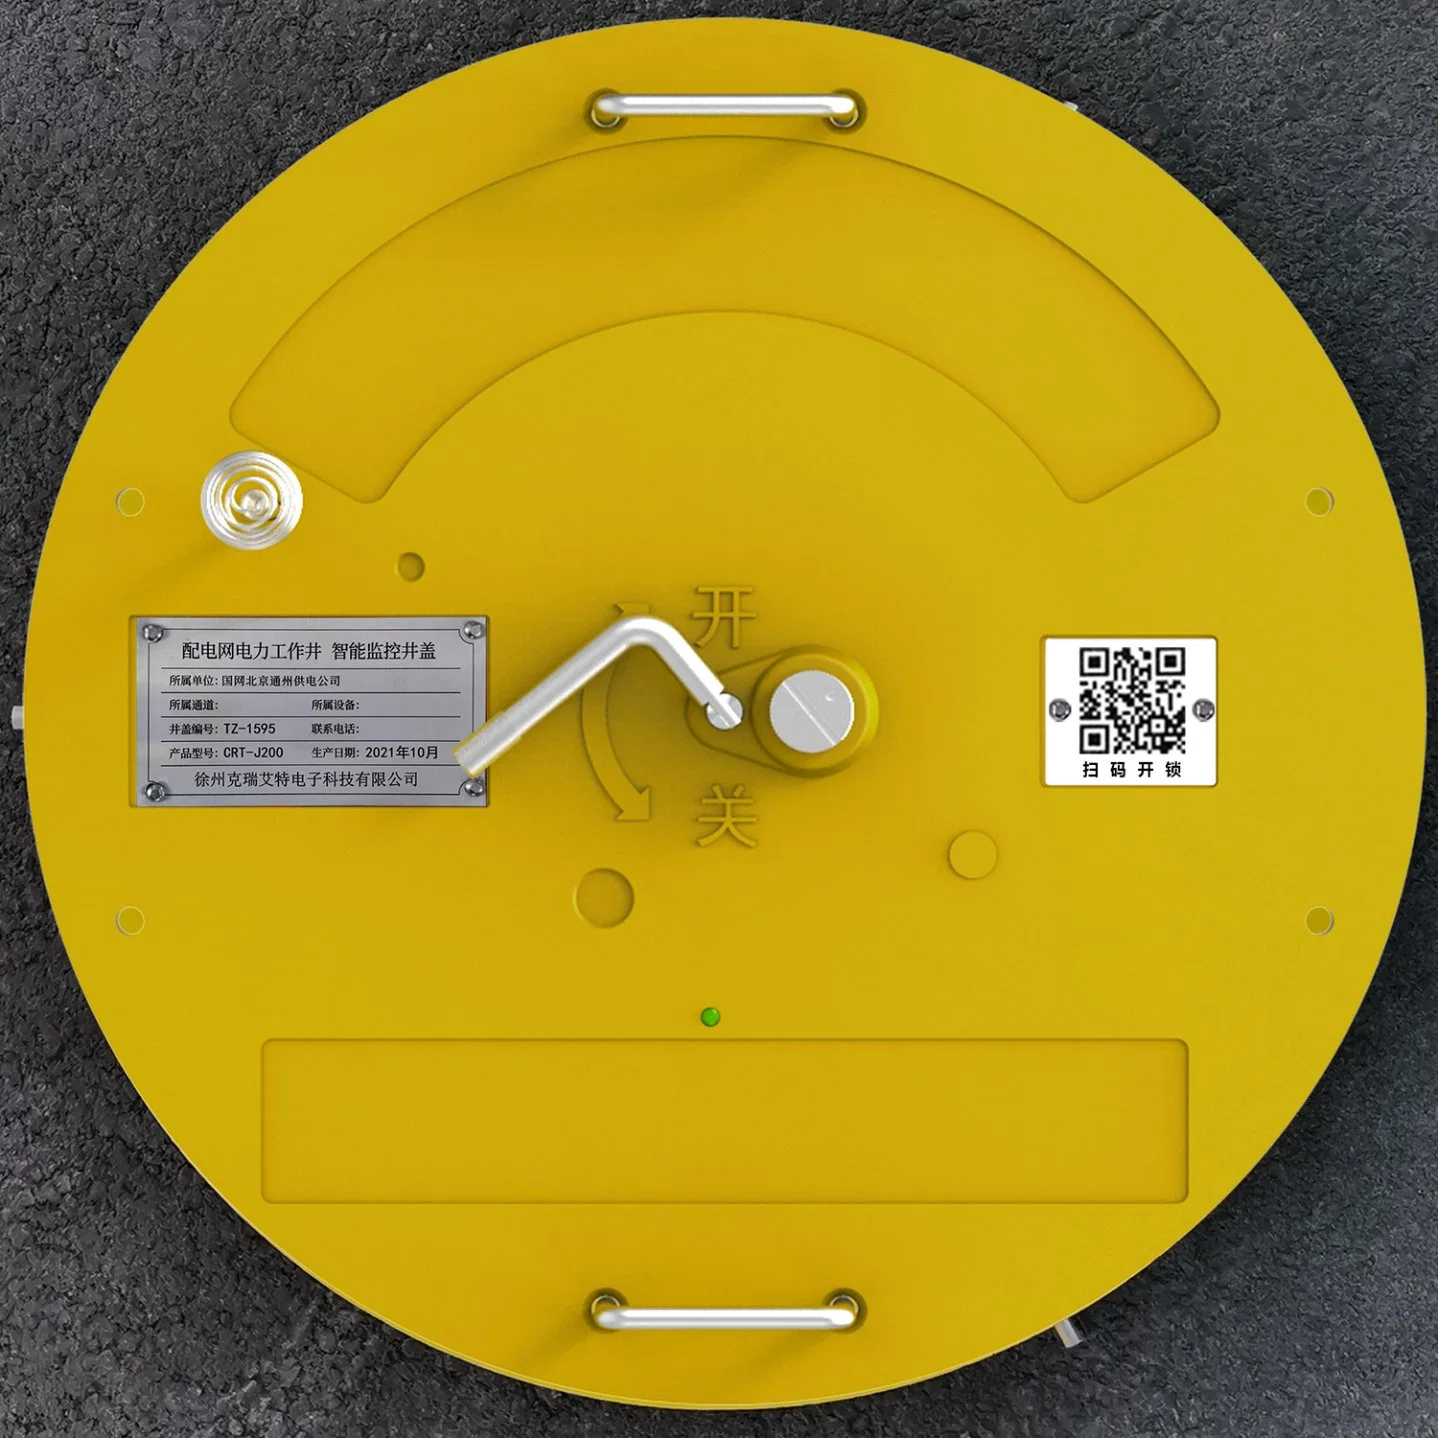 Iot Nb 4G Management Electronic Master Key System Multifunction Smart Real-Time Monitoring Manhole Cover Safety3